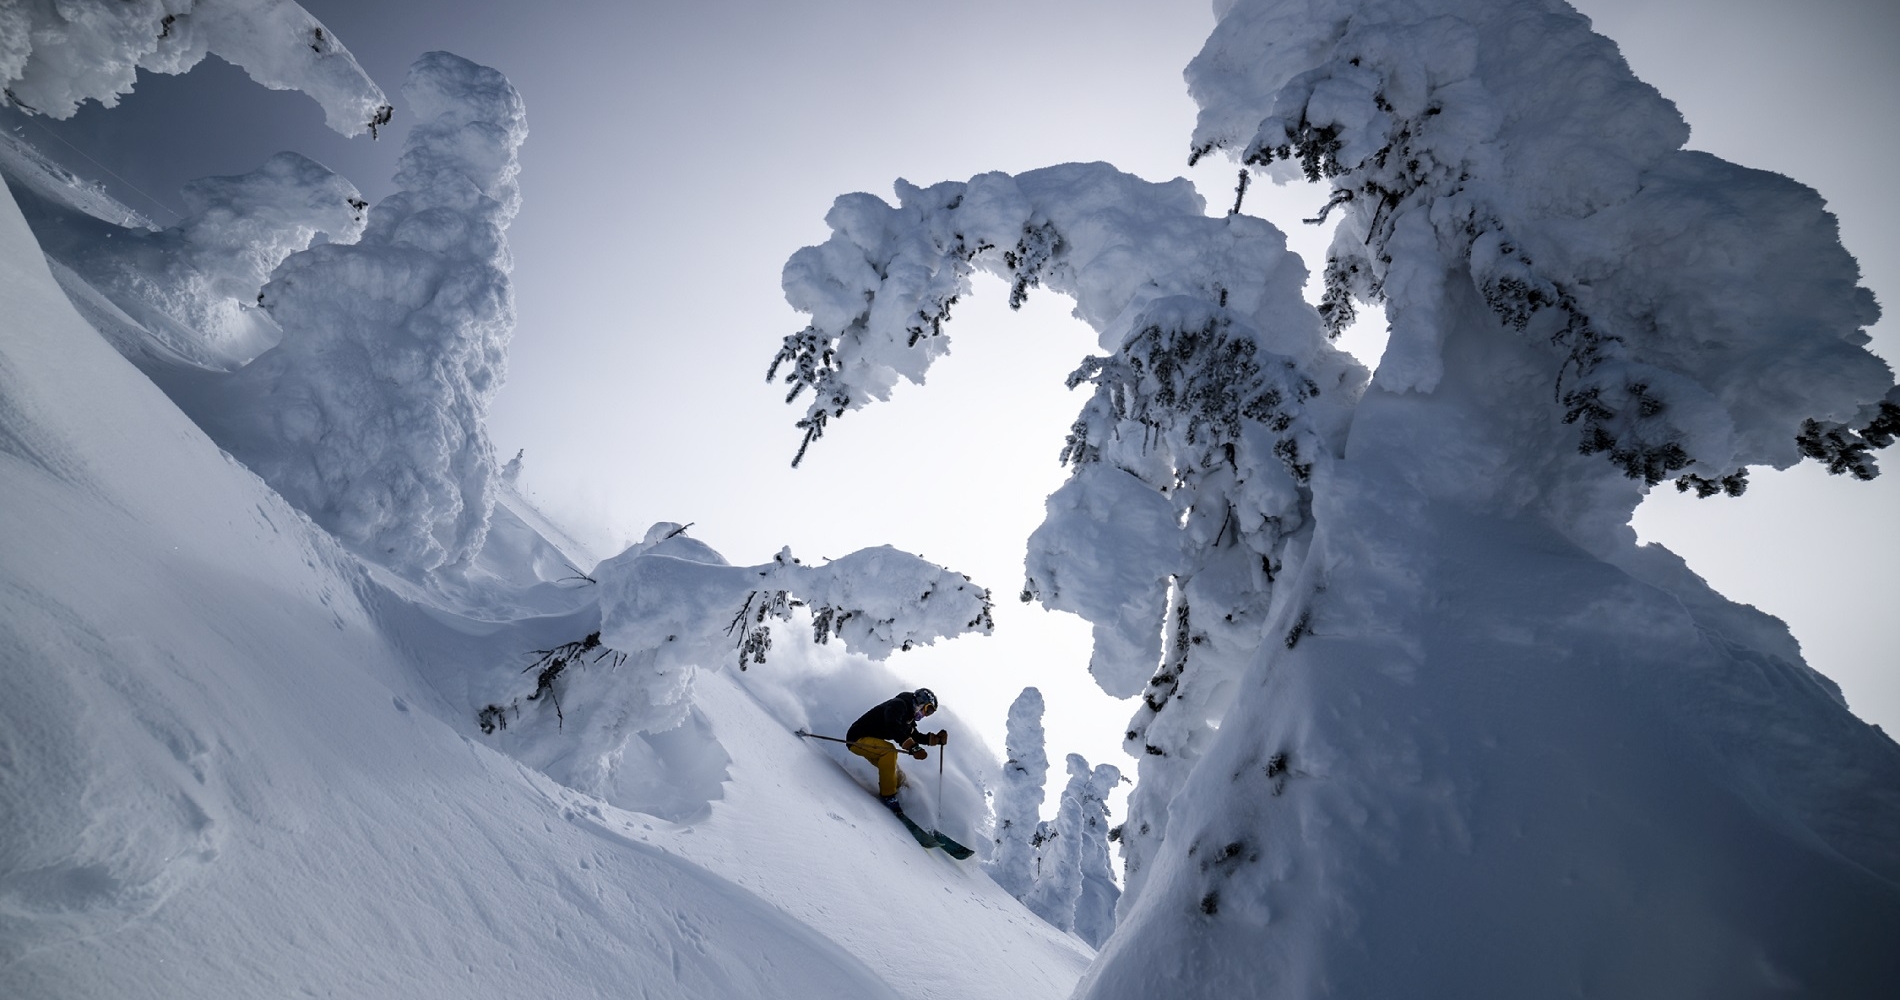 One skier in deep powder seen through the trees heavy with snow at Revelstoke Mountain Resort